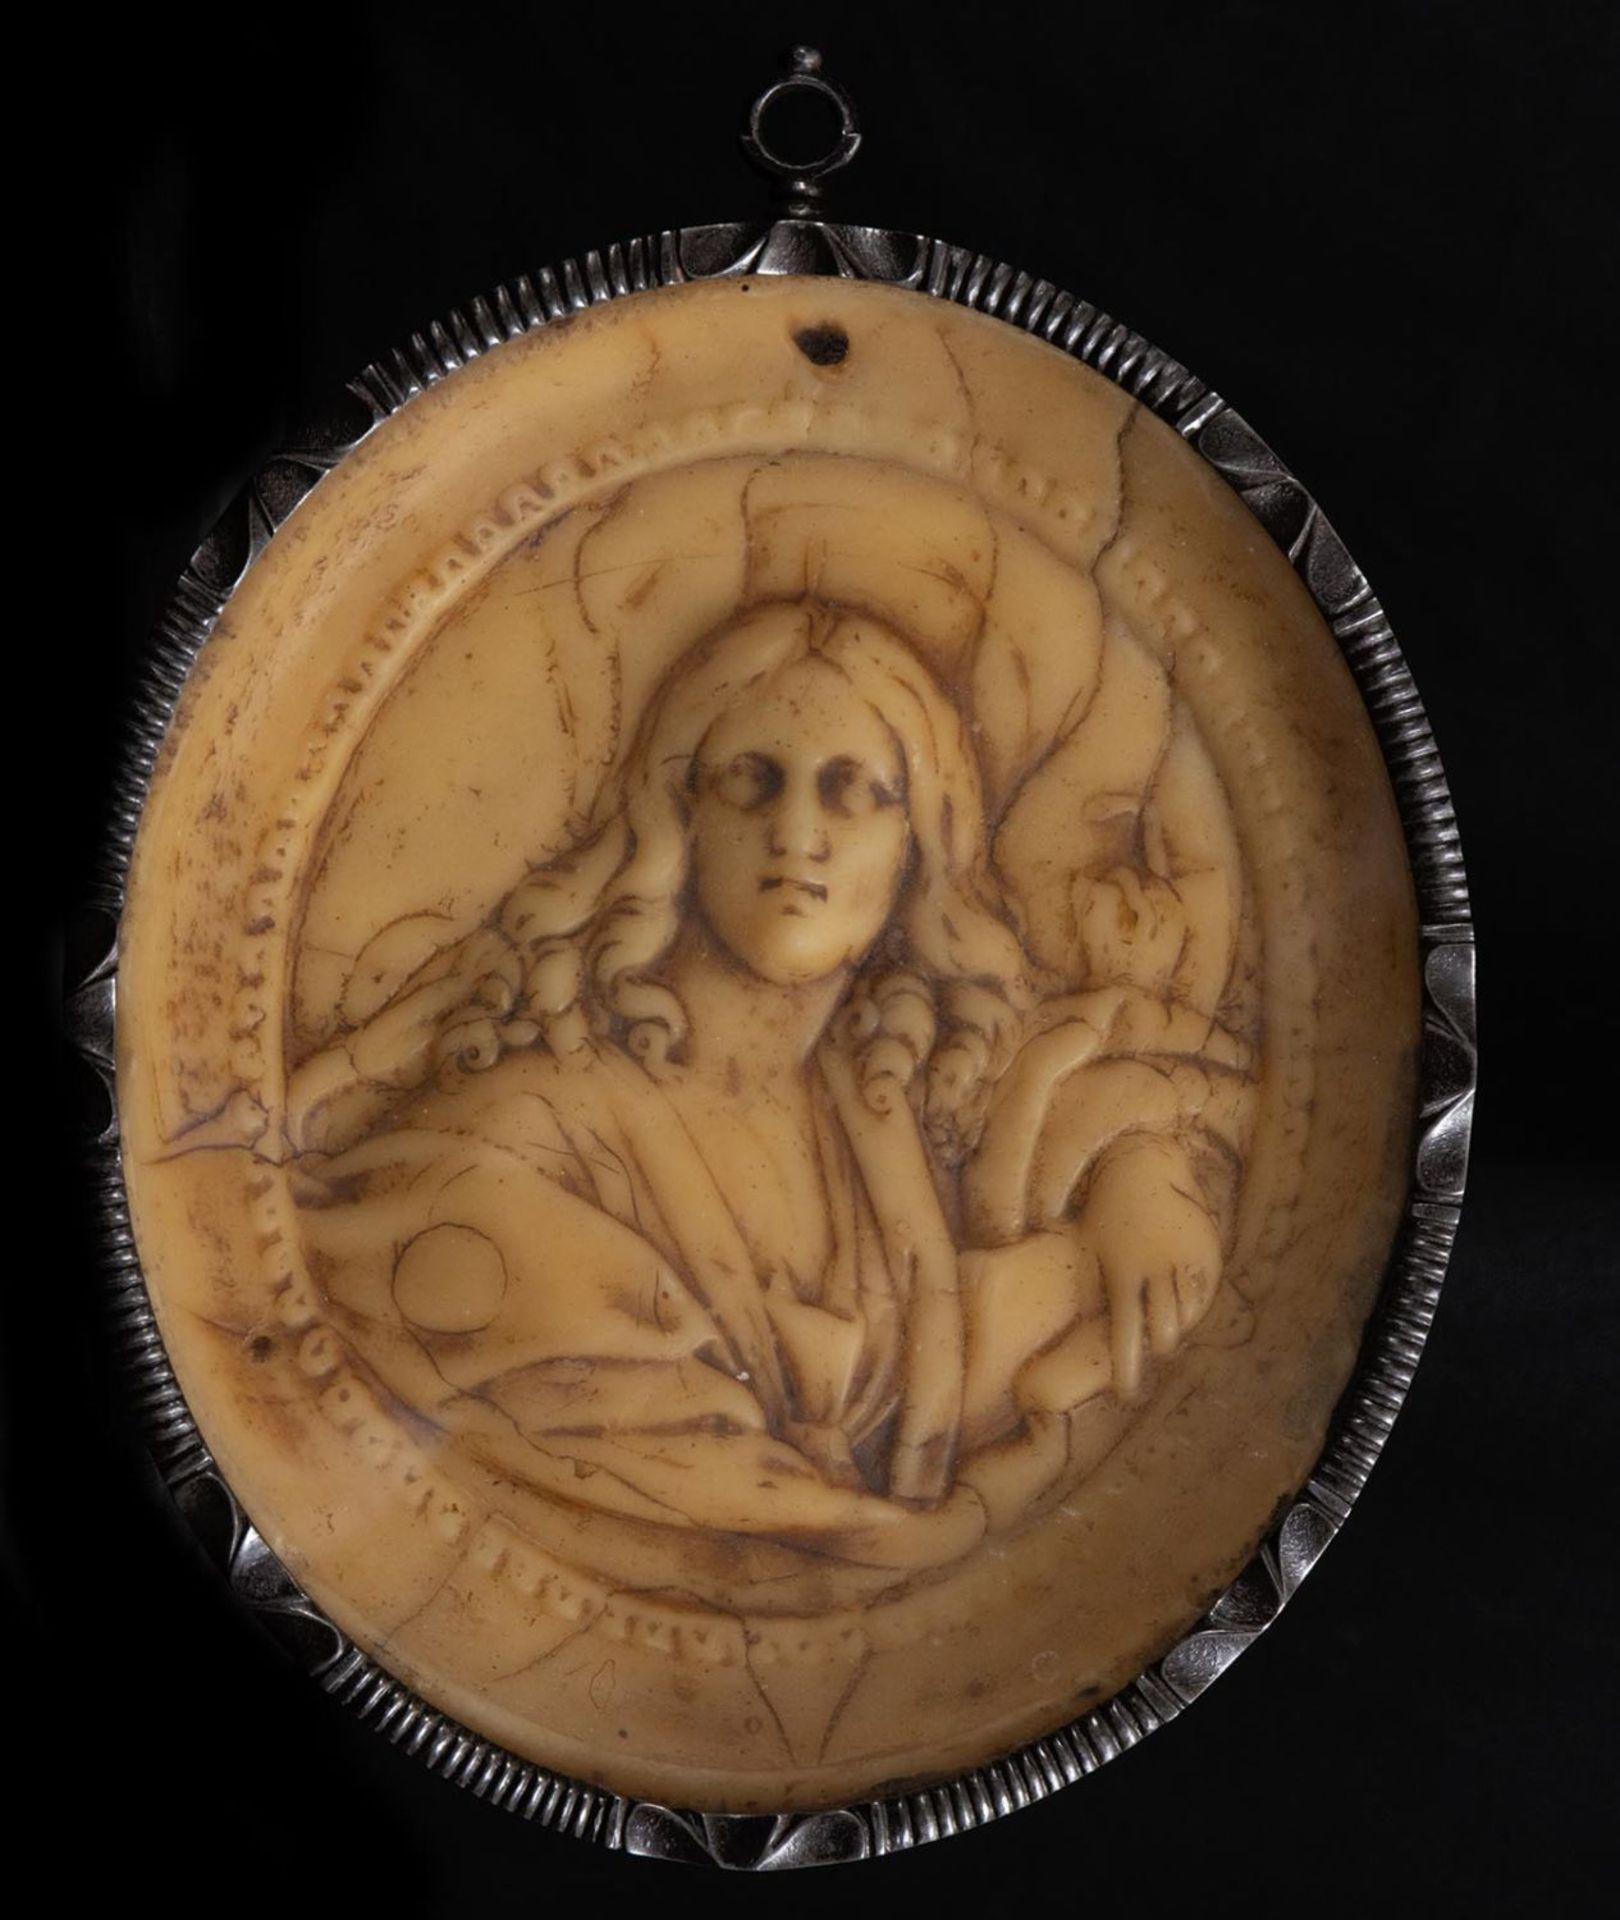 Oval with wax hair reliquary with Saint John the Evangelist, Italian Renaissance work from the 16th 